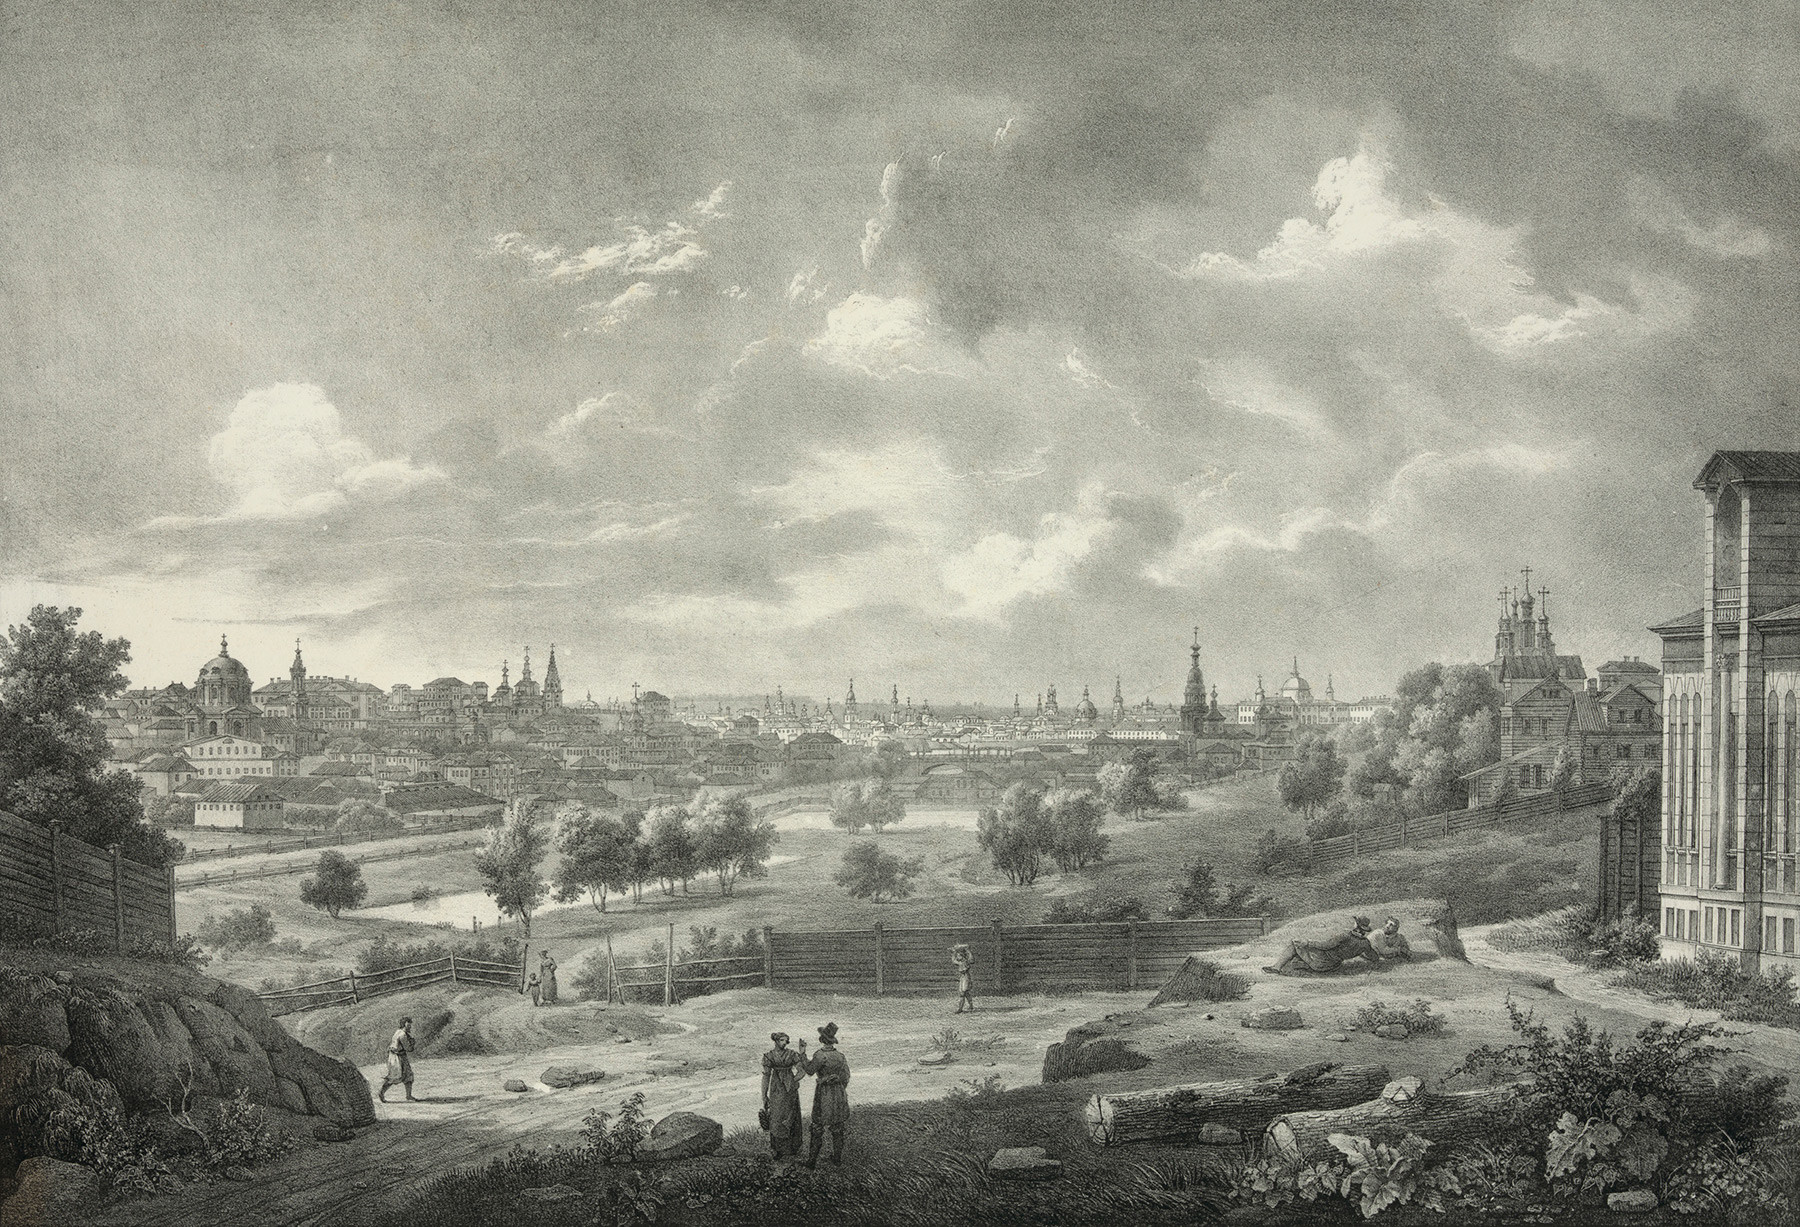 Over the Yauza River in Moscow, c. 1830.